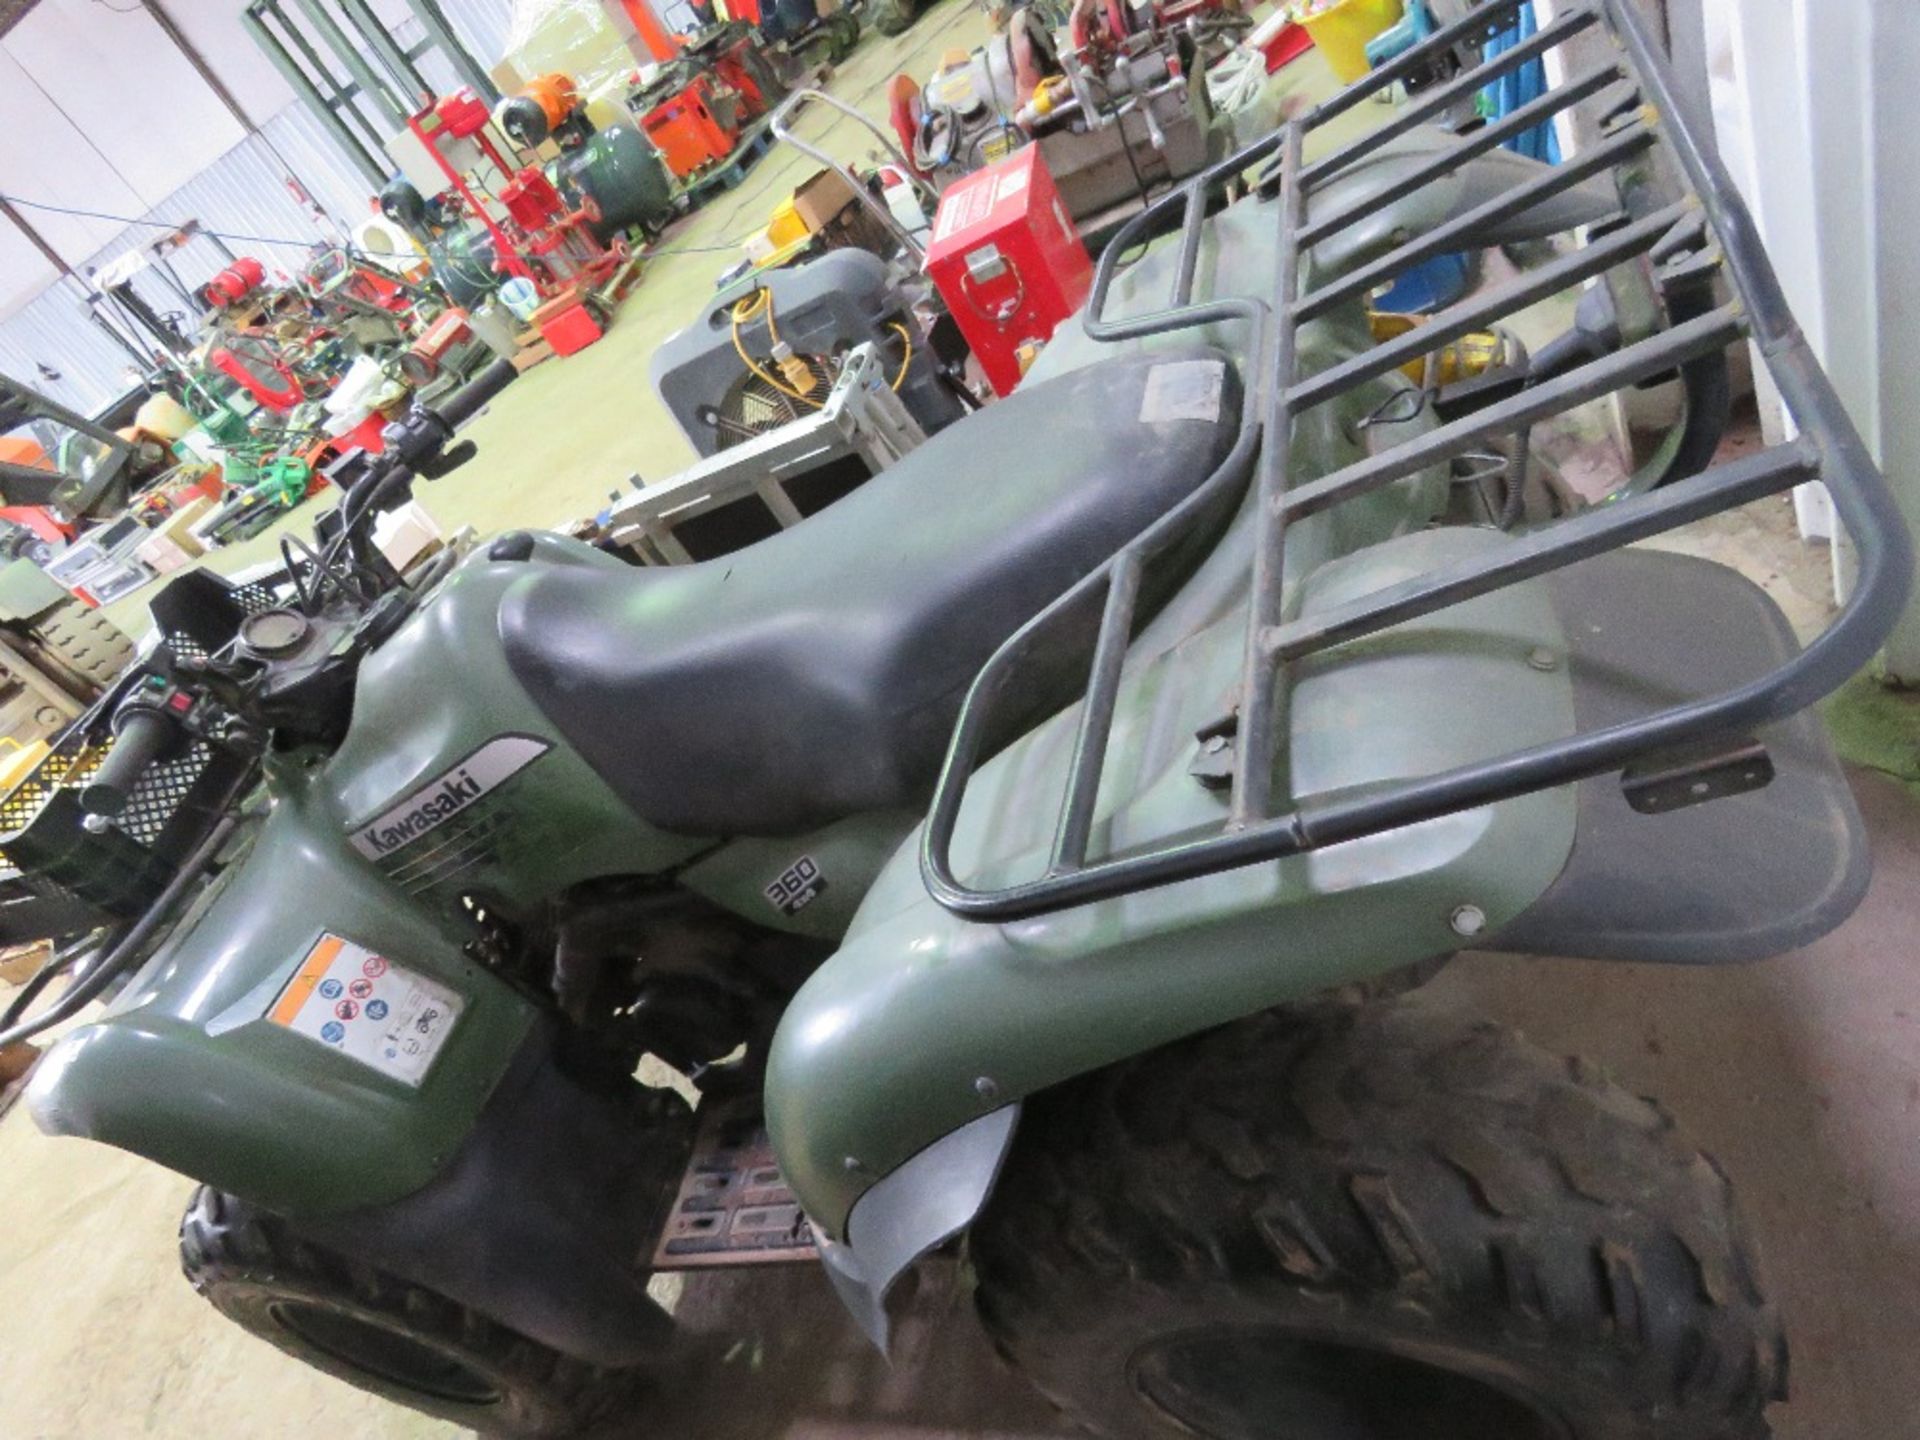 KAWASAKI KVF360 4WD QUAD BIKE, 2939 REC HRS. WHEN TESTED WAS SEEN TO DRIVE...SEE VIDEO. - Image 4 of 7